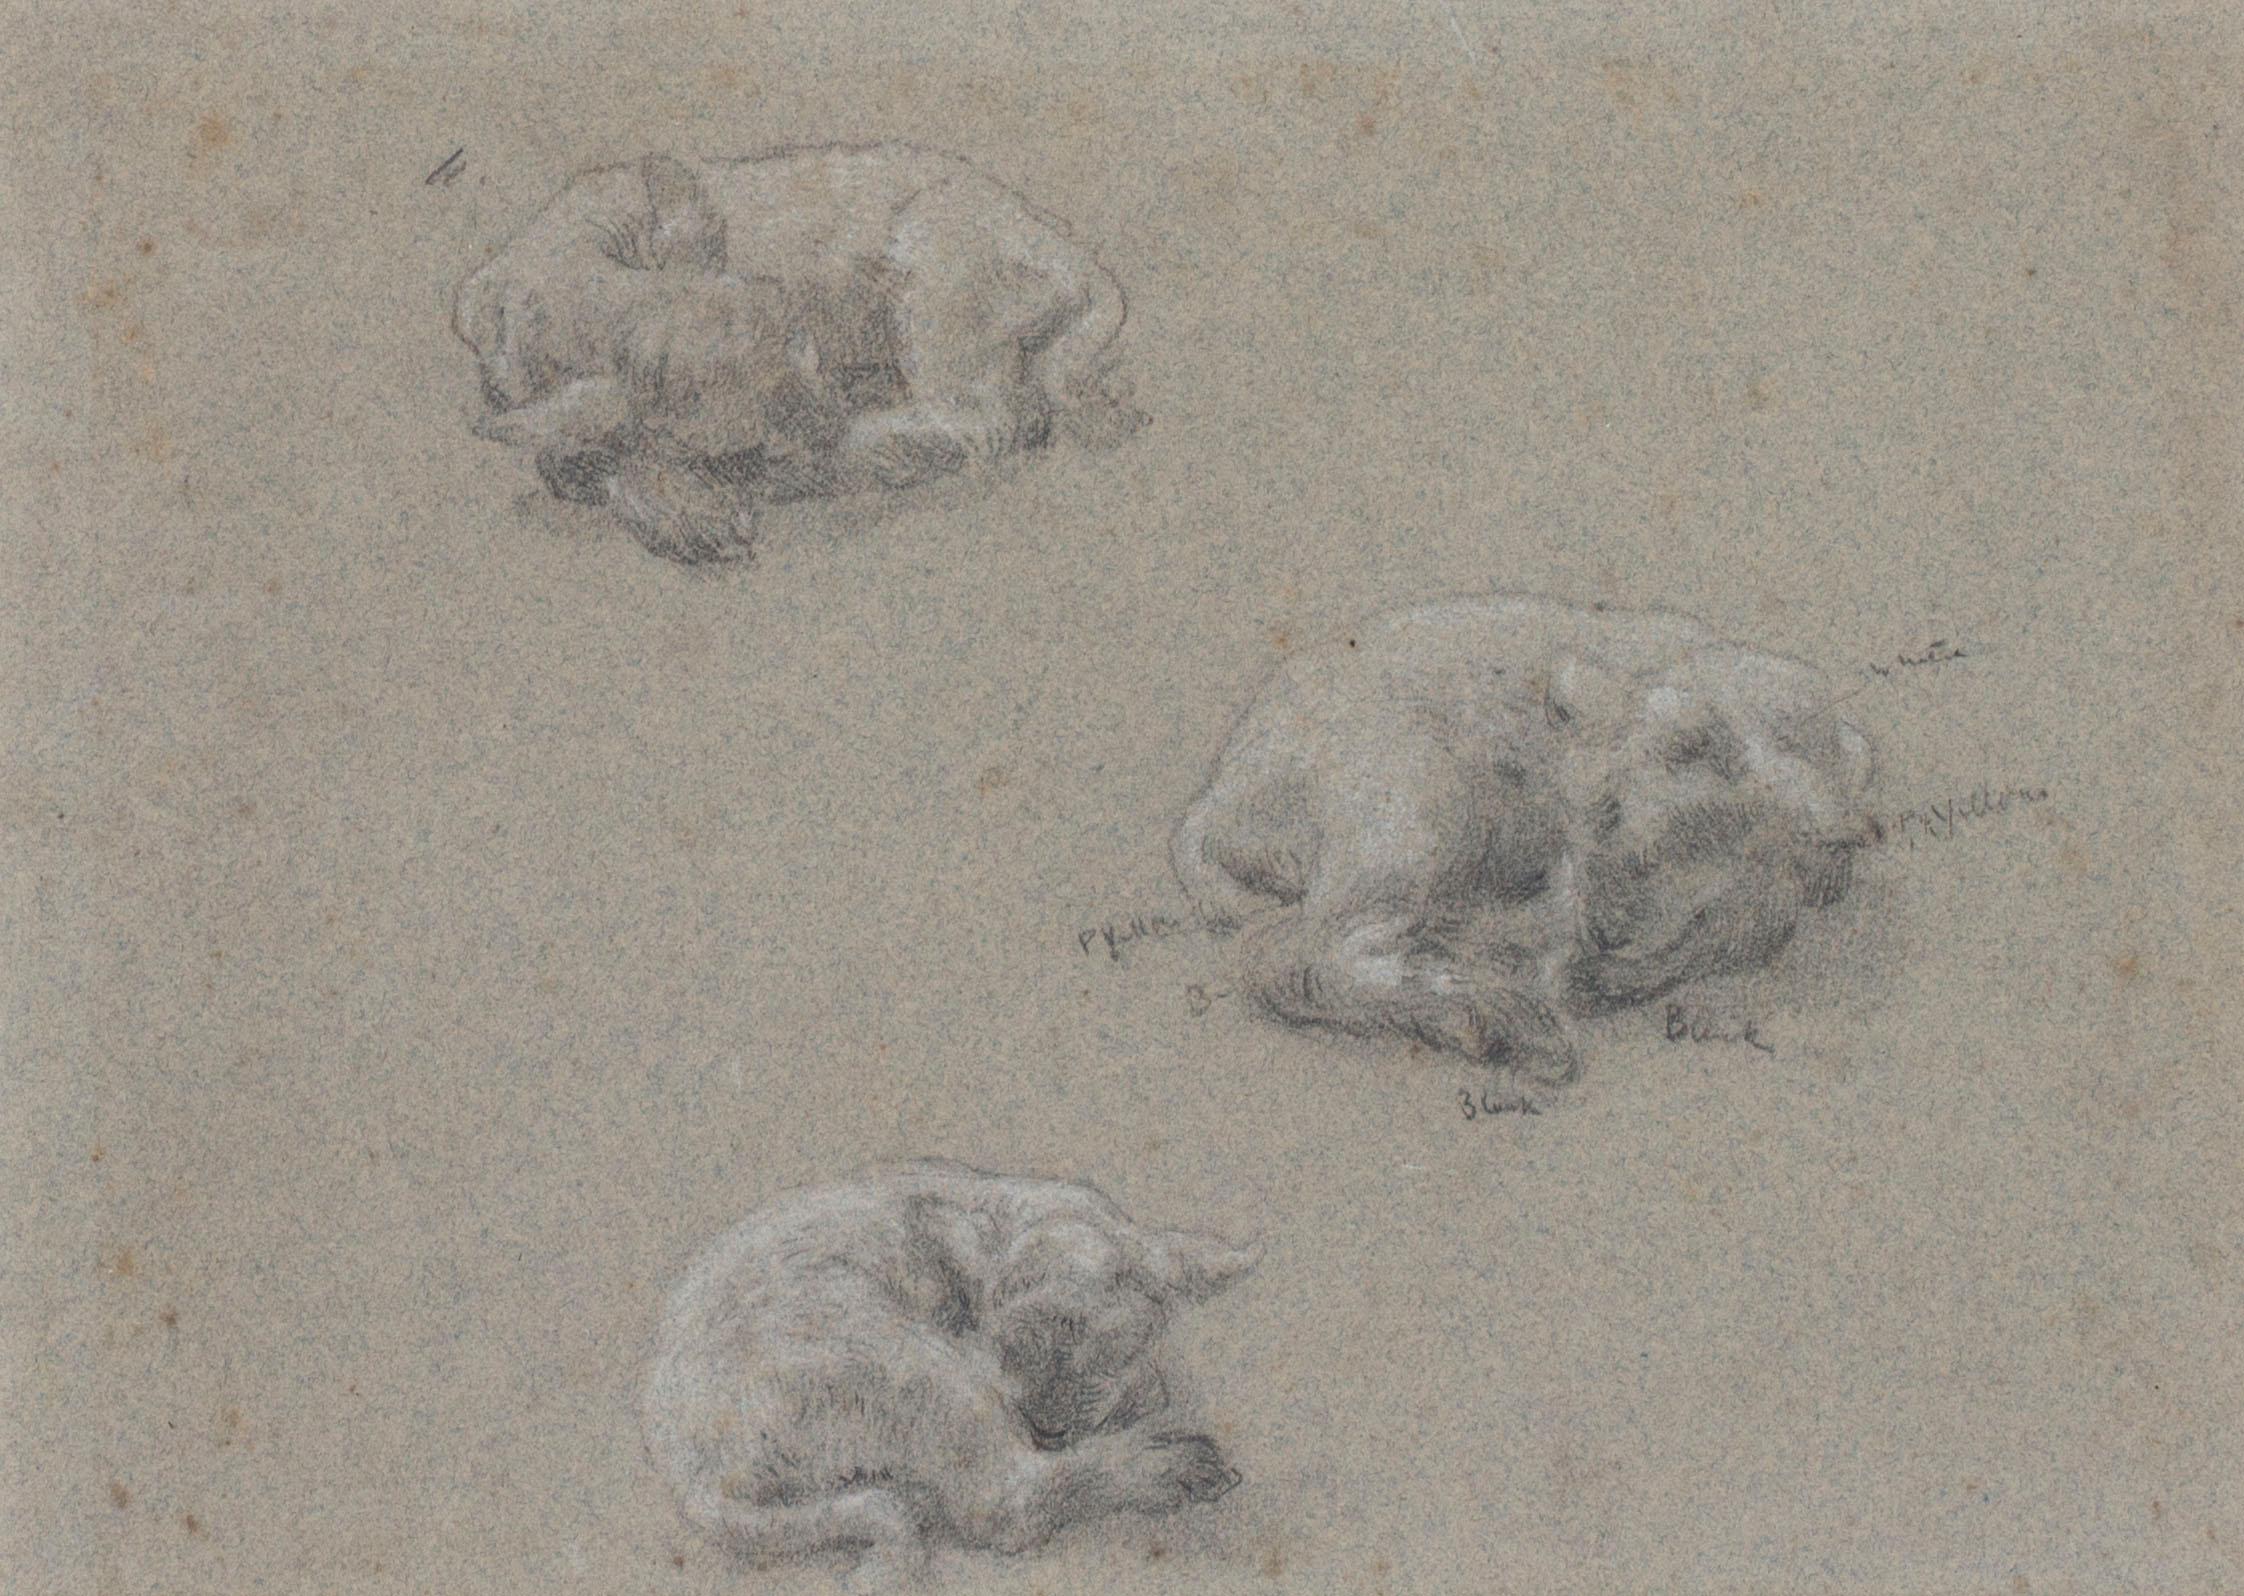 Albert Goodwin (British, 1834 – 1932)
Sleeping lambs
Pencil and chalk on paper
7.1/8 x 10.1/8 in.(18.2 x 26 cm.)
Inscribed ‘Sketched by Albert Goodwin RWS’ (on the reverse)
